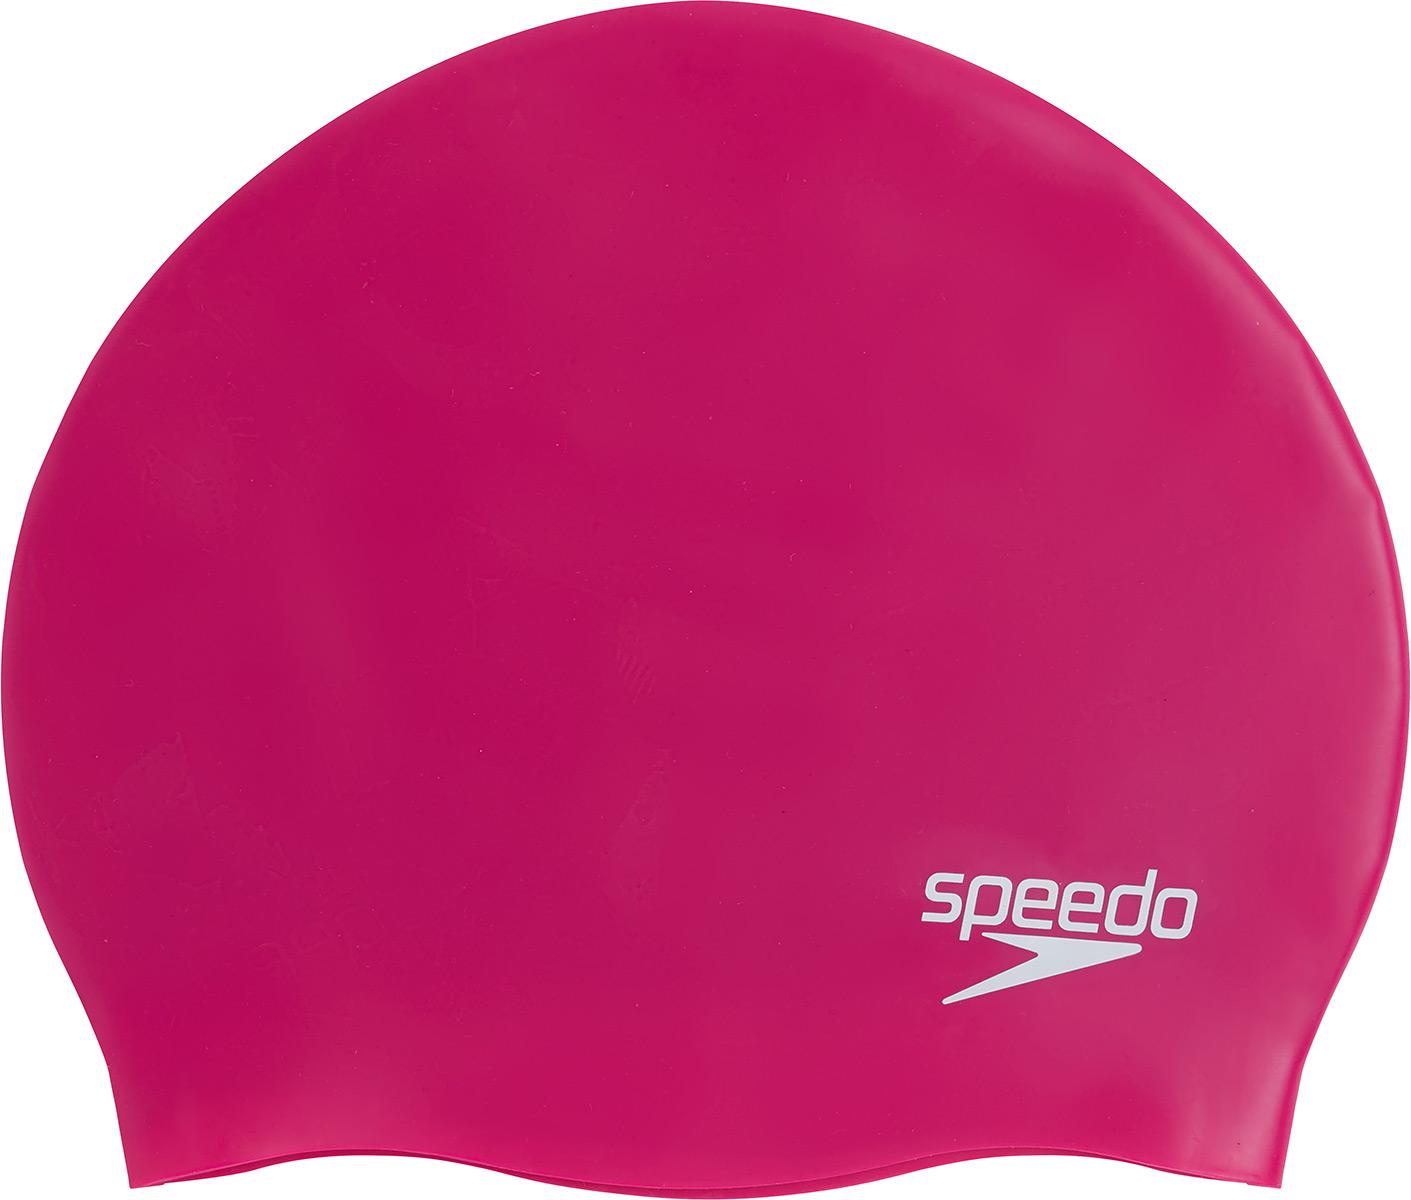 Speedo Plain Moulded Silicone Swimming Cap - Electric Pink